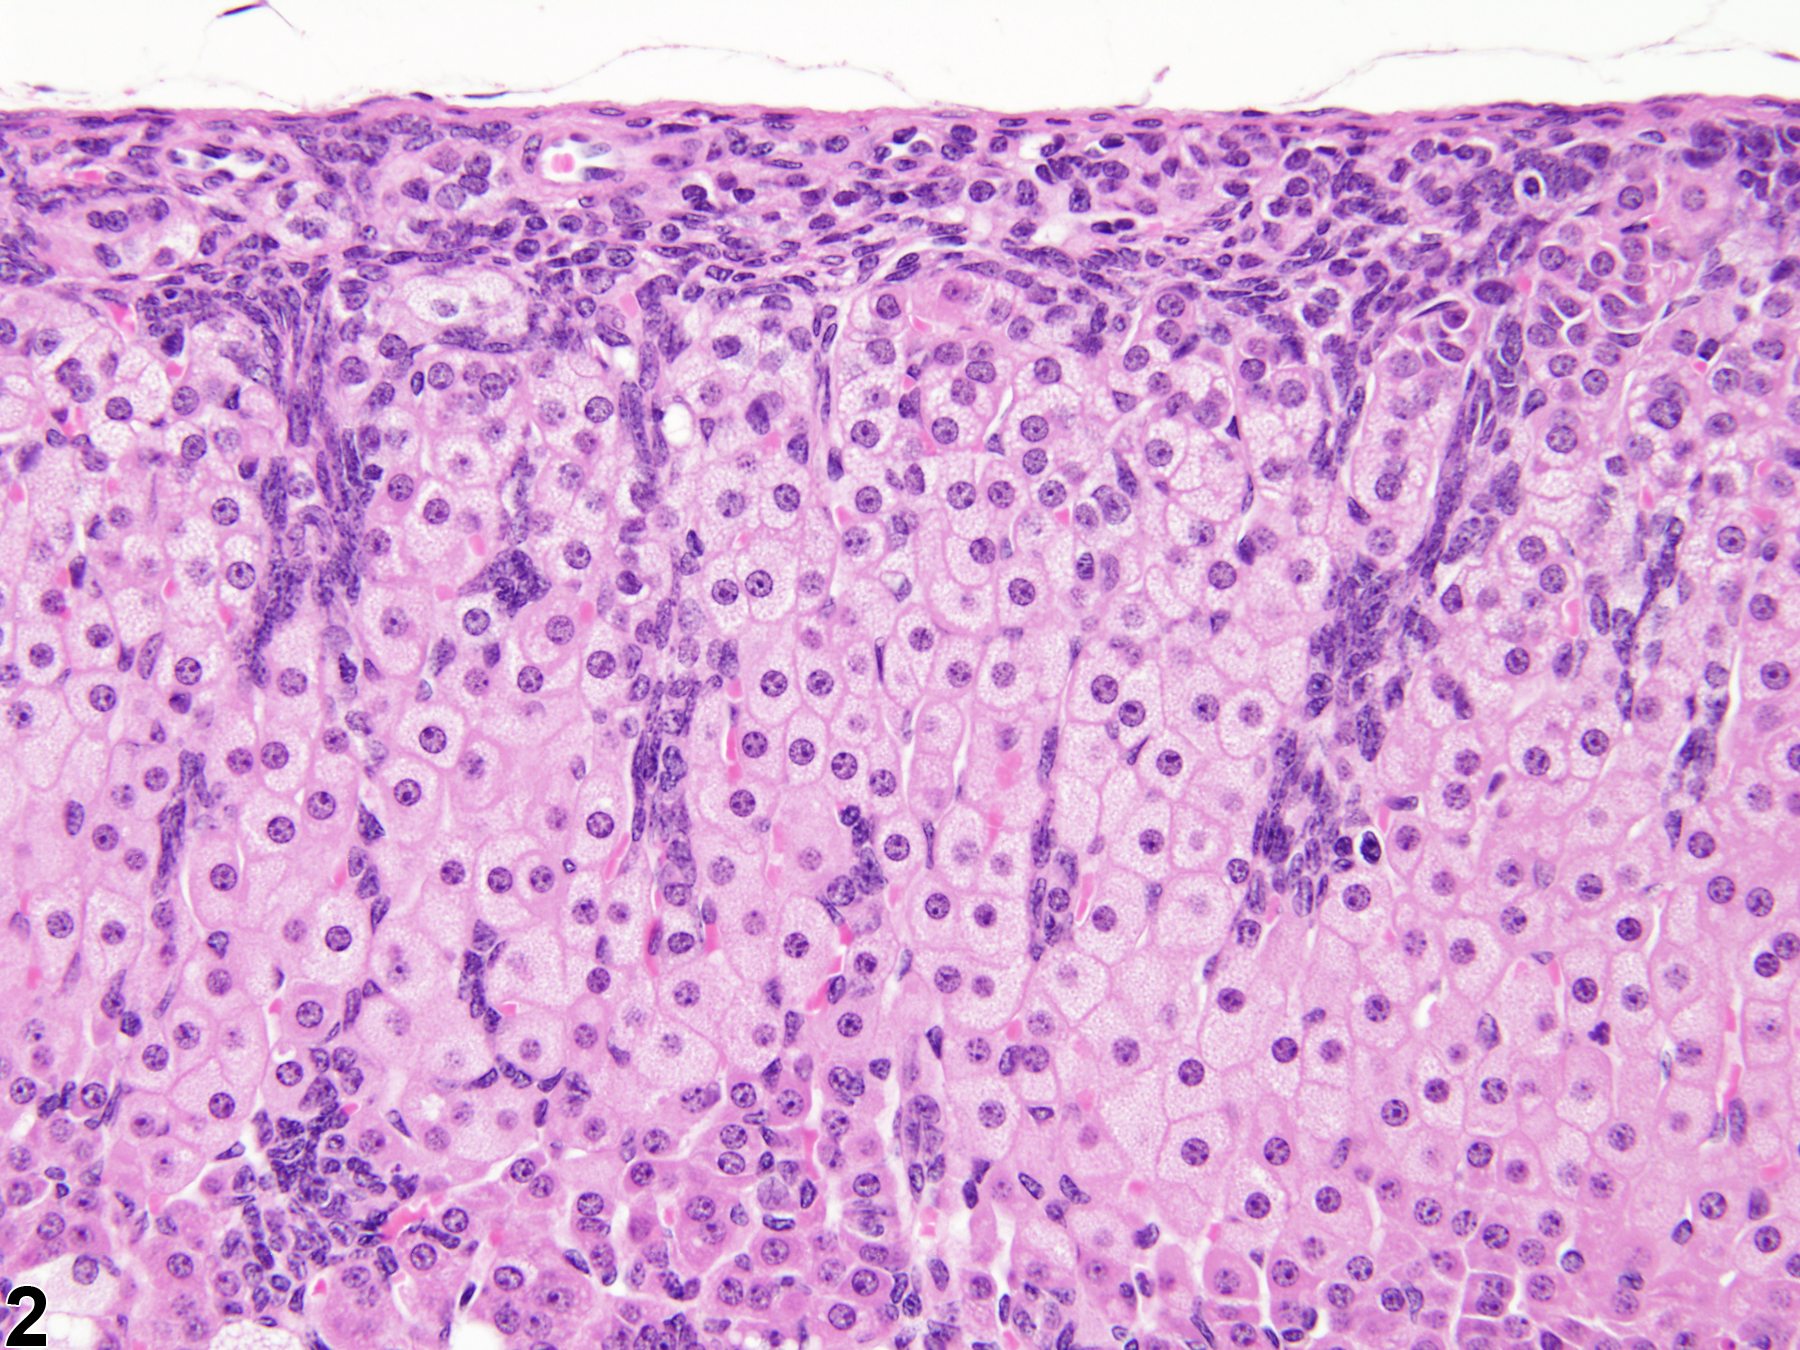 Image of hyperplasia, subcapsular in the adrenal gland cortex from a female B6C3F1/N mouse in a subchronic study